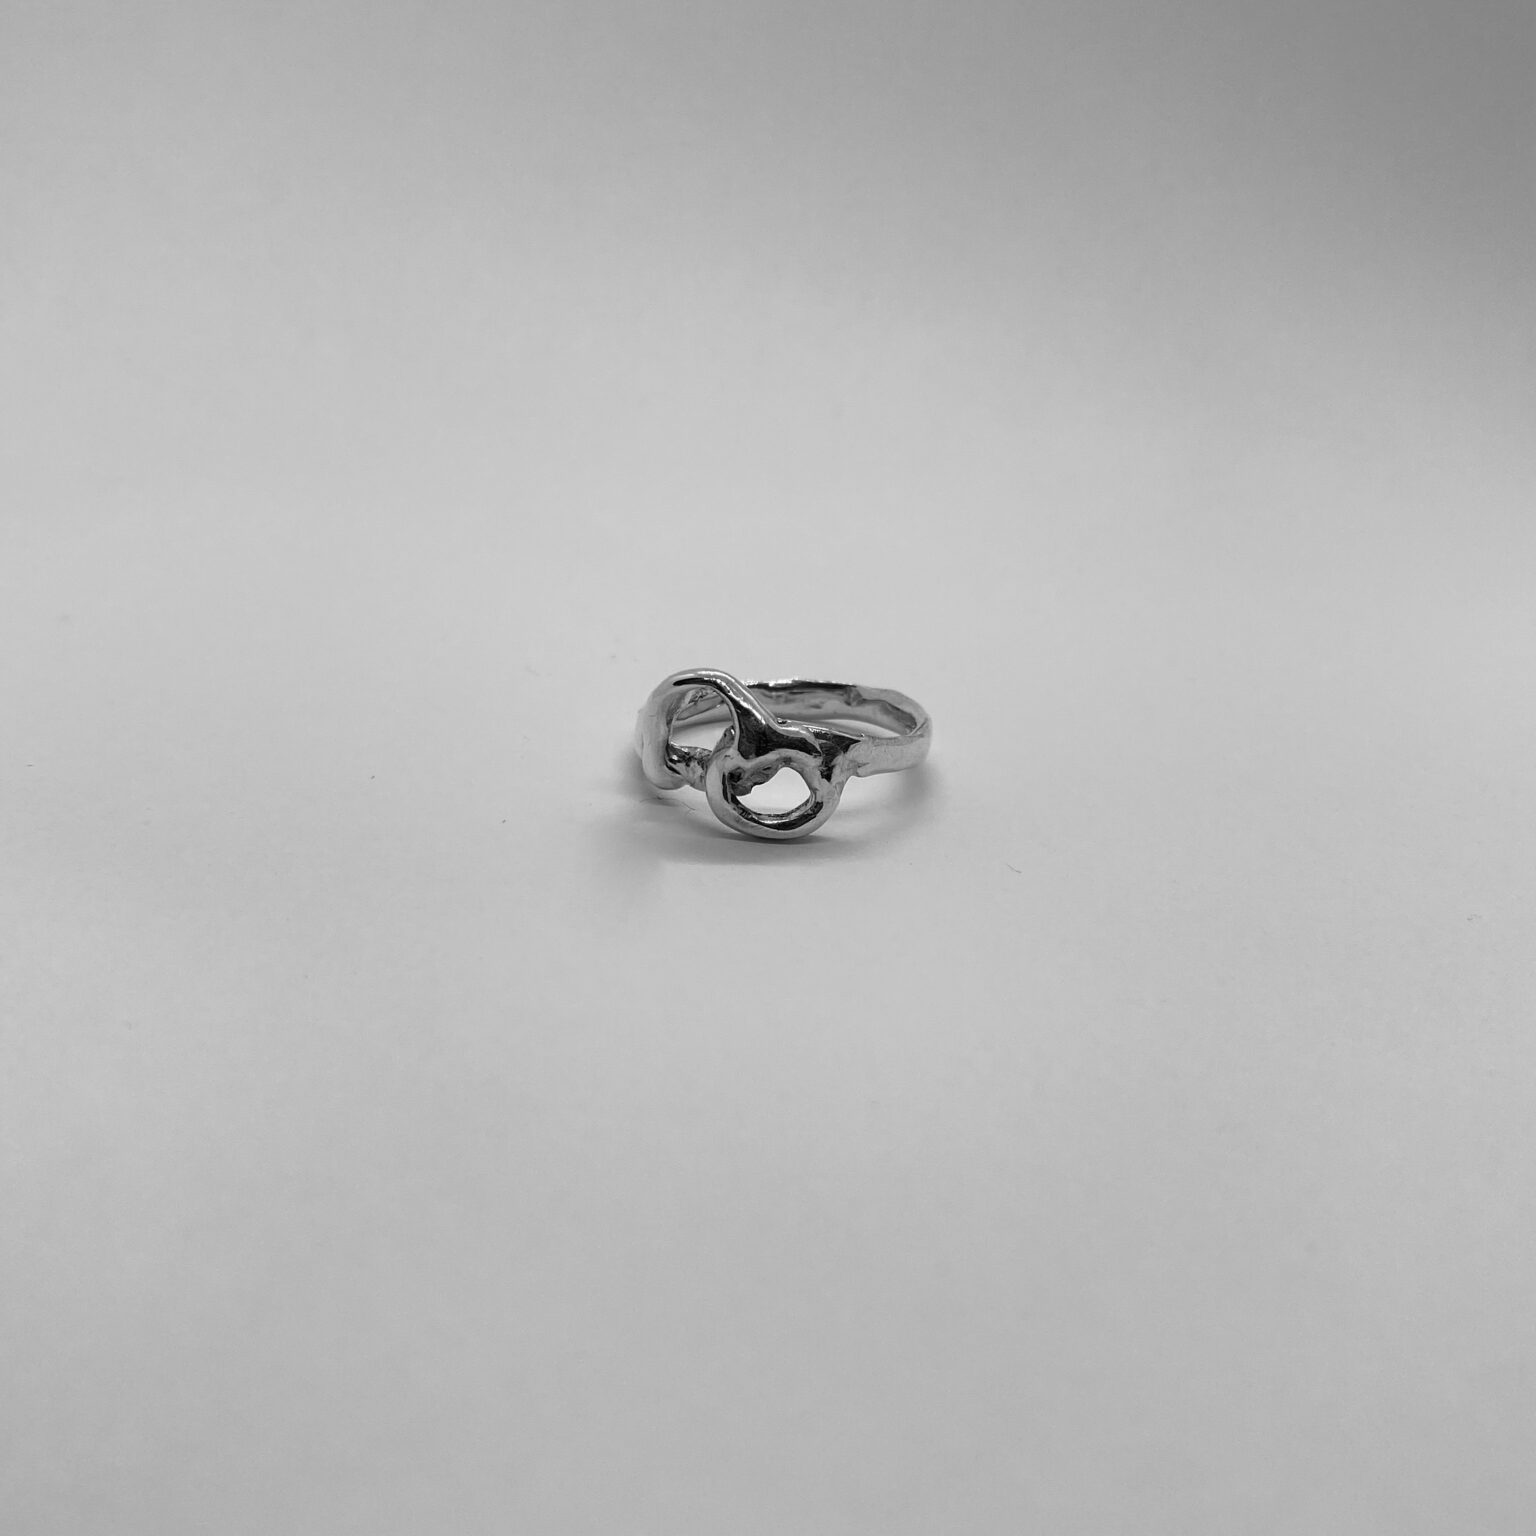 The Twin ring is a handmade piece made of 925 sterling silver. Its surface is smooth and glossy.